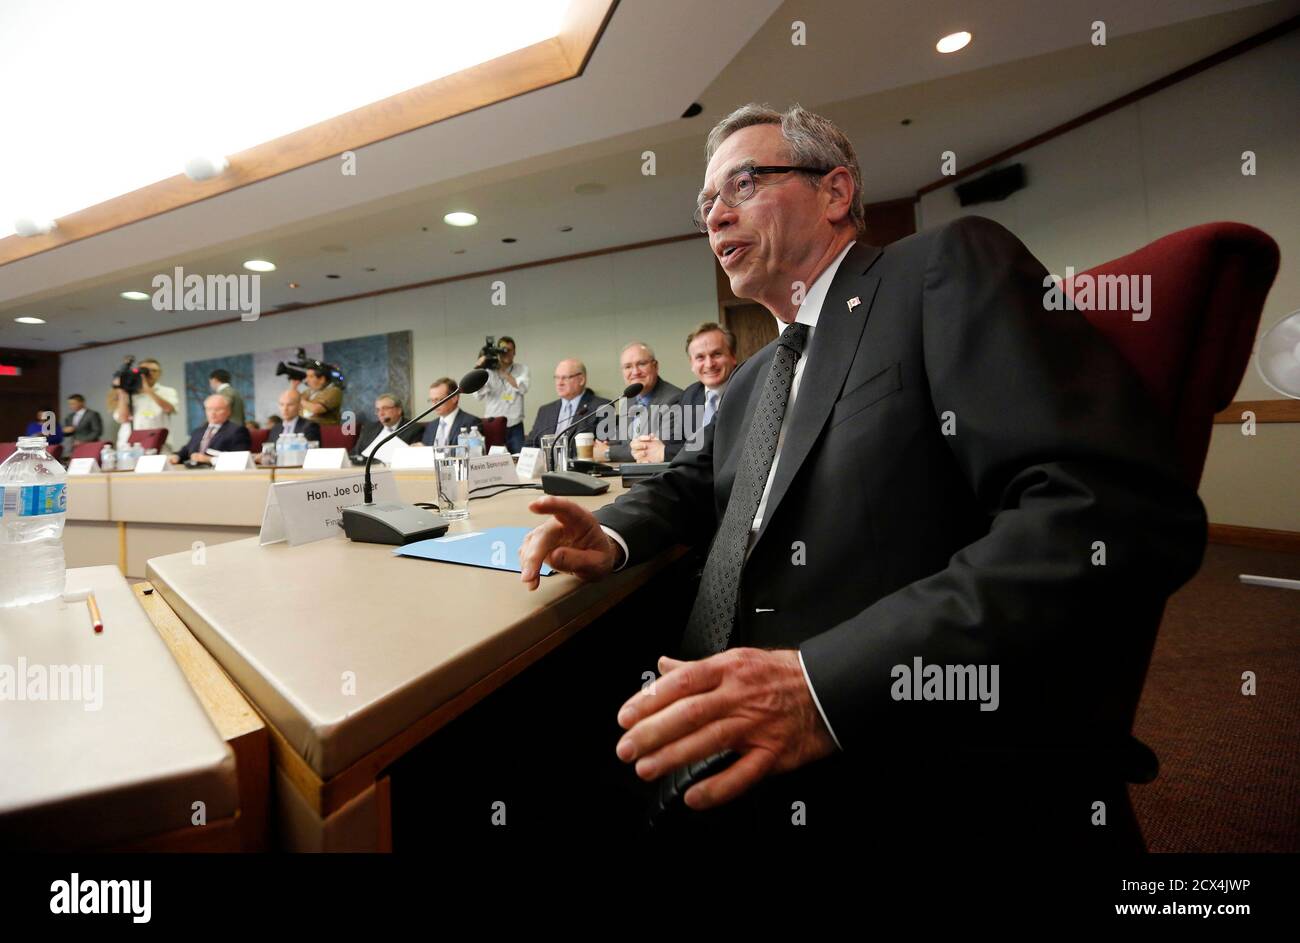 Canada's Finance Minister Joe Oliver (R) meets with private sector economists in Ottawa June 16, 2014. REUTERS/Chris Wattie (CANADA - Tags: POLITICS BUSINESS) Stock Photo